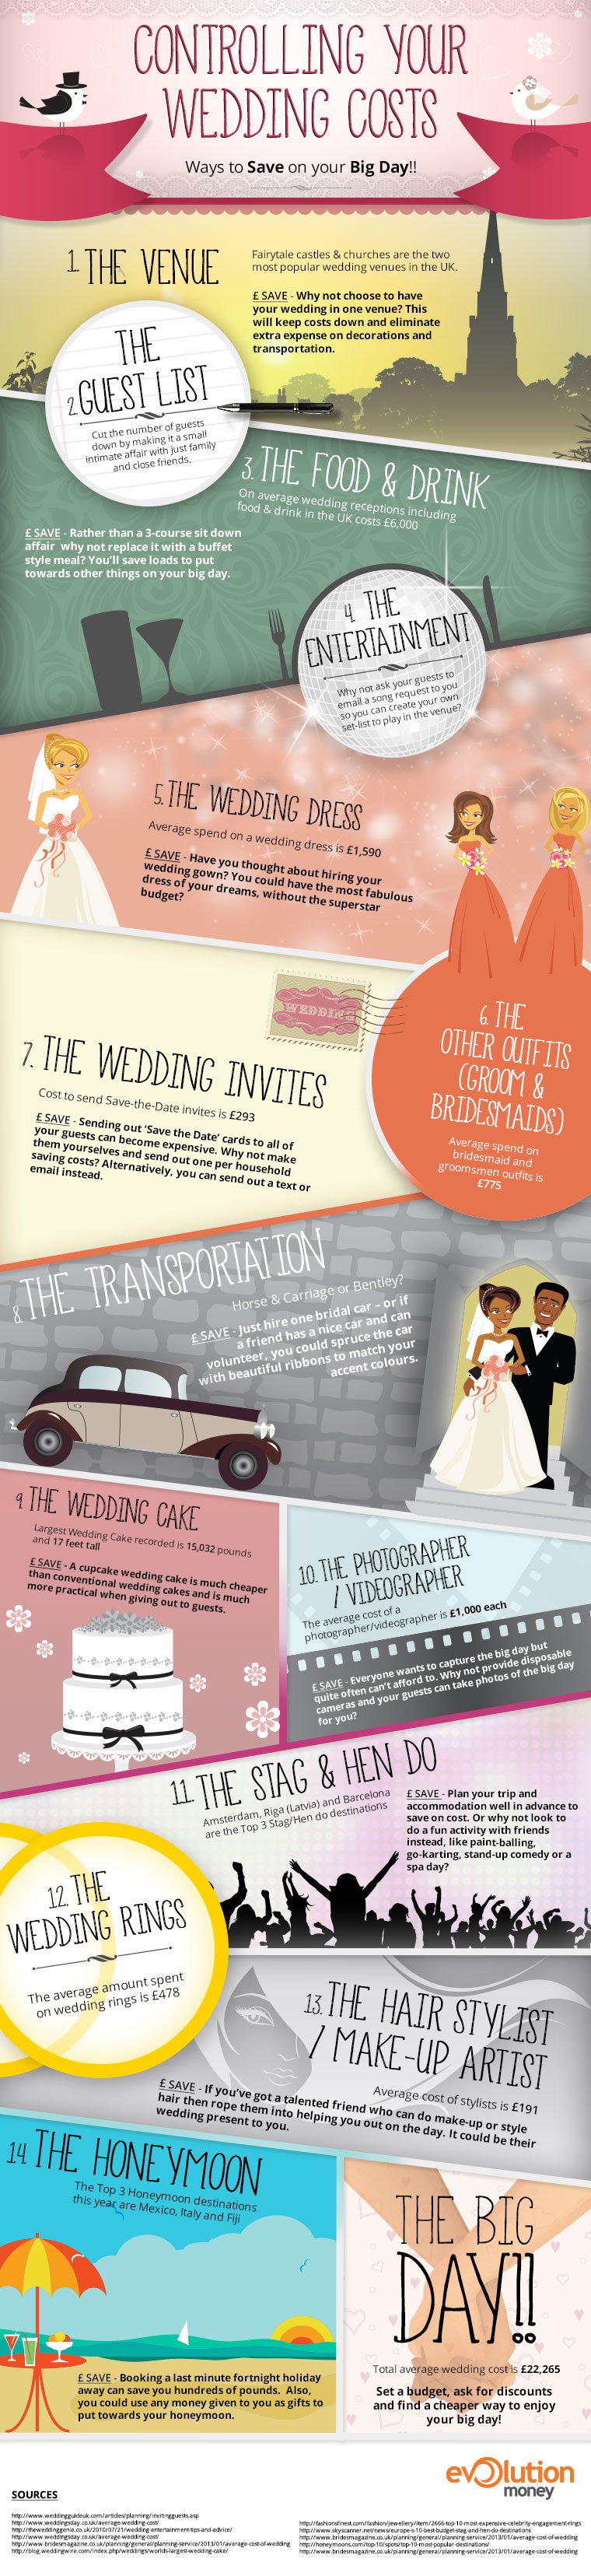 Controlling your wedding costs